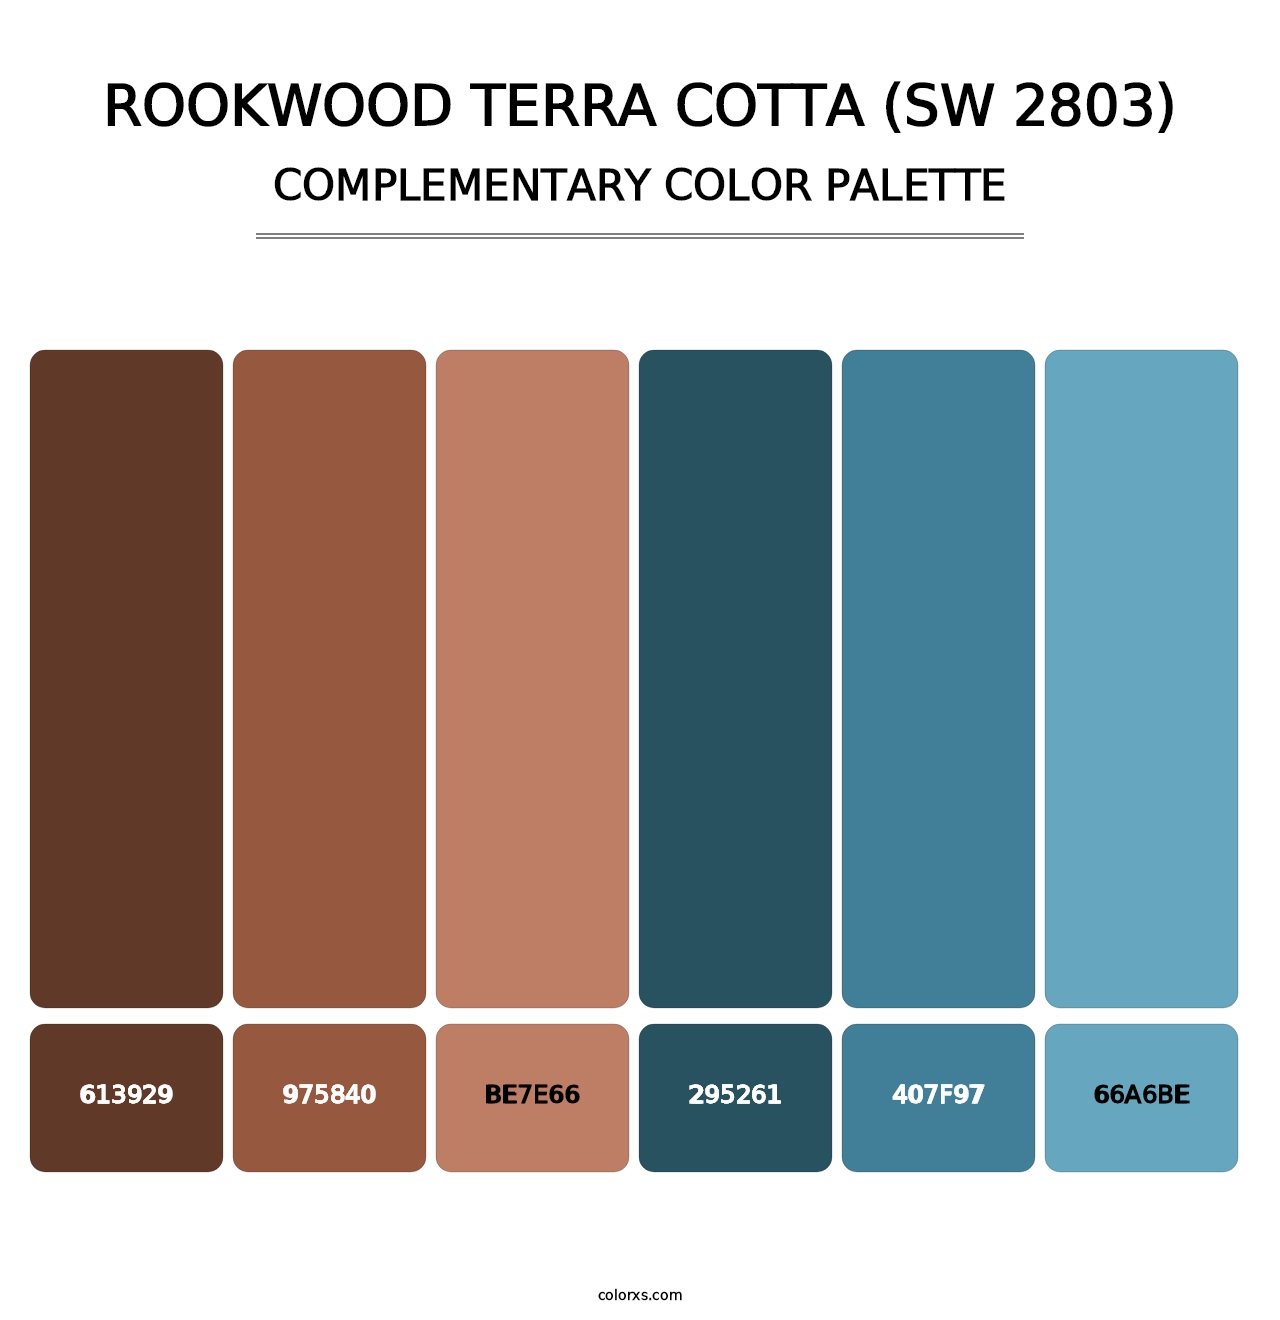 Rookwood Terra Cotta (SW 2803) - Complementary Color Palette